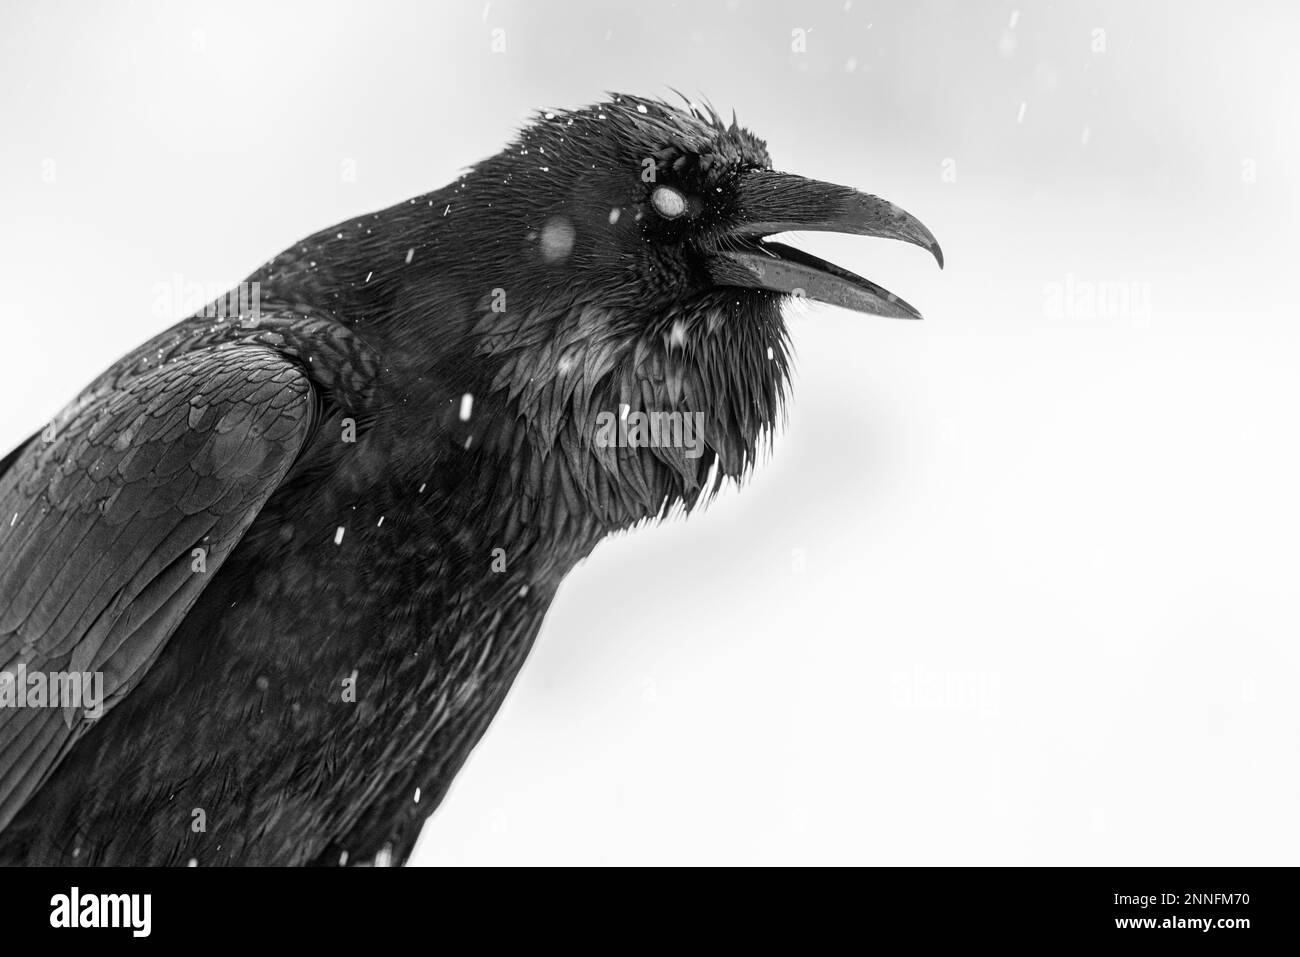 Raven blinking in the snow. Stock Photo